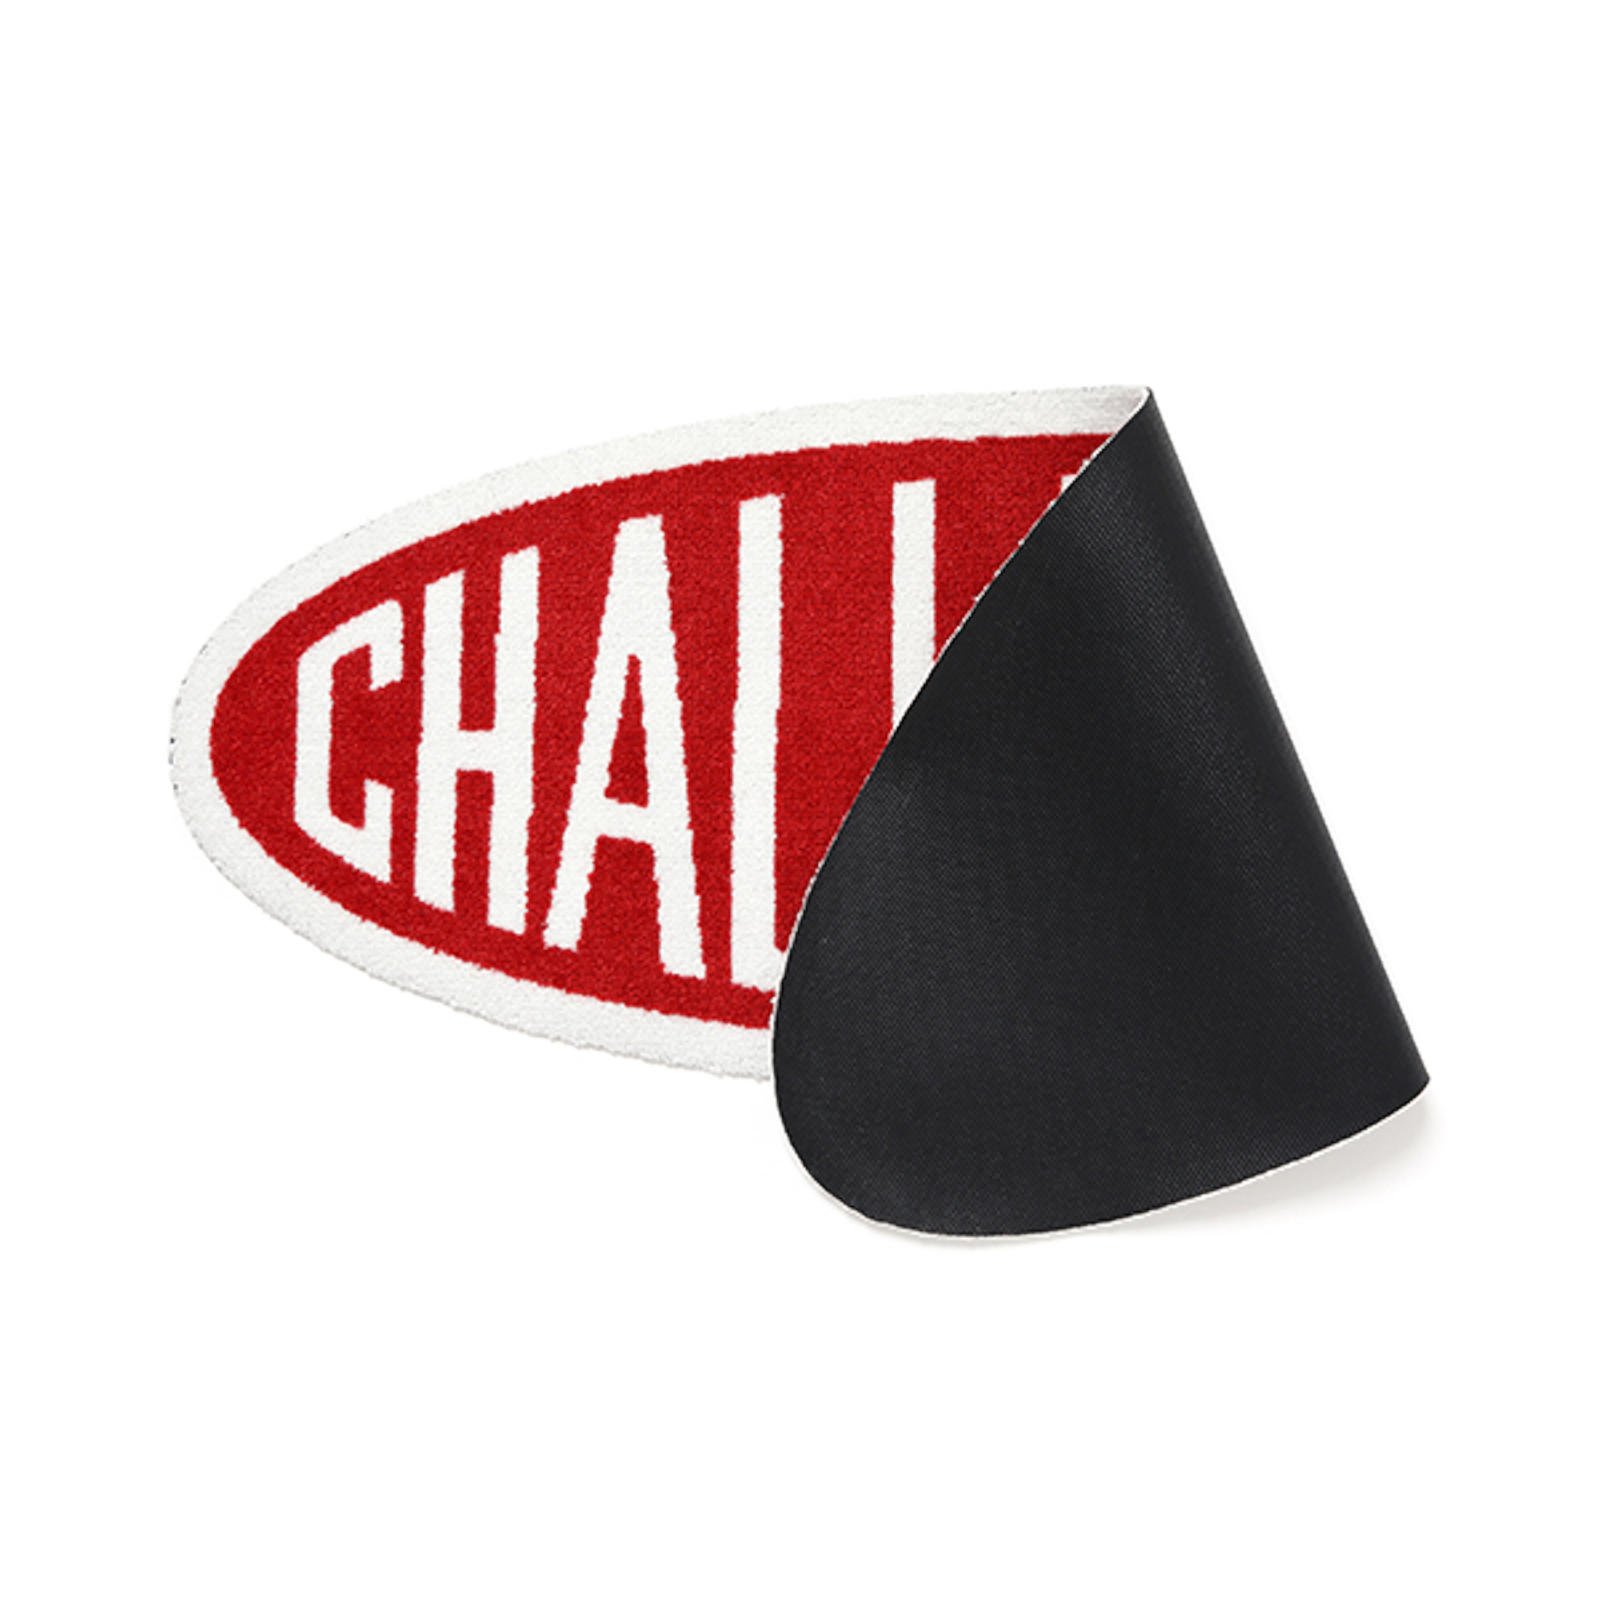 CHALLENGER OVAL LOGO MAT（RED）オーバルロゴマット - カーペット